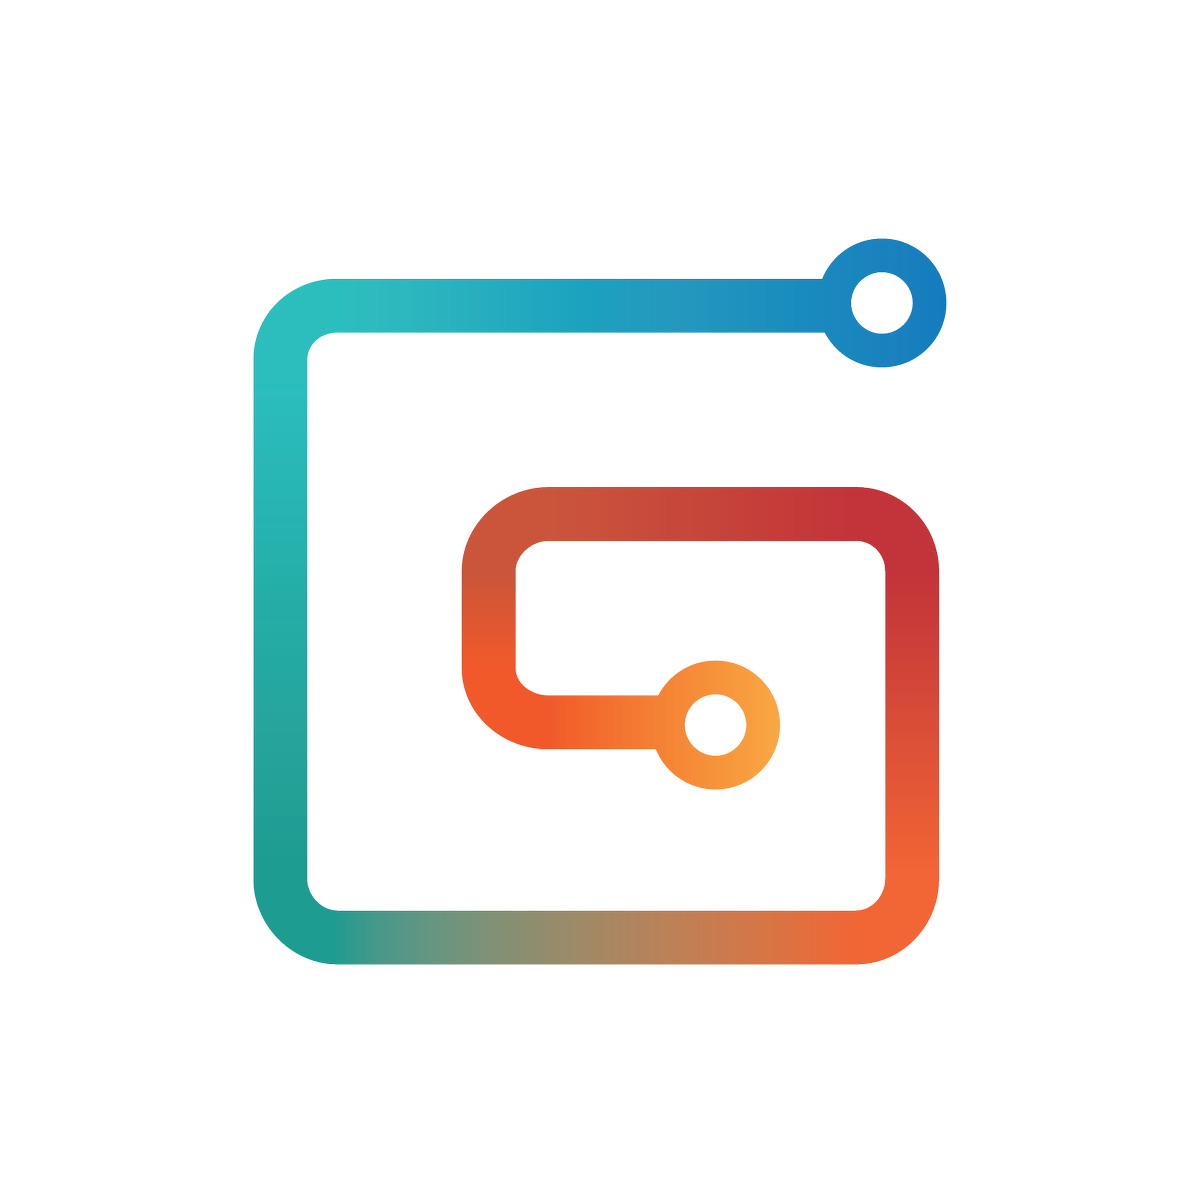 Tapfiliate and Gumroad integration